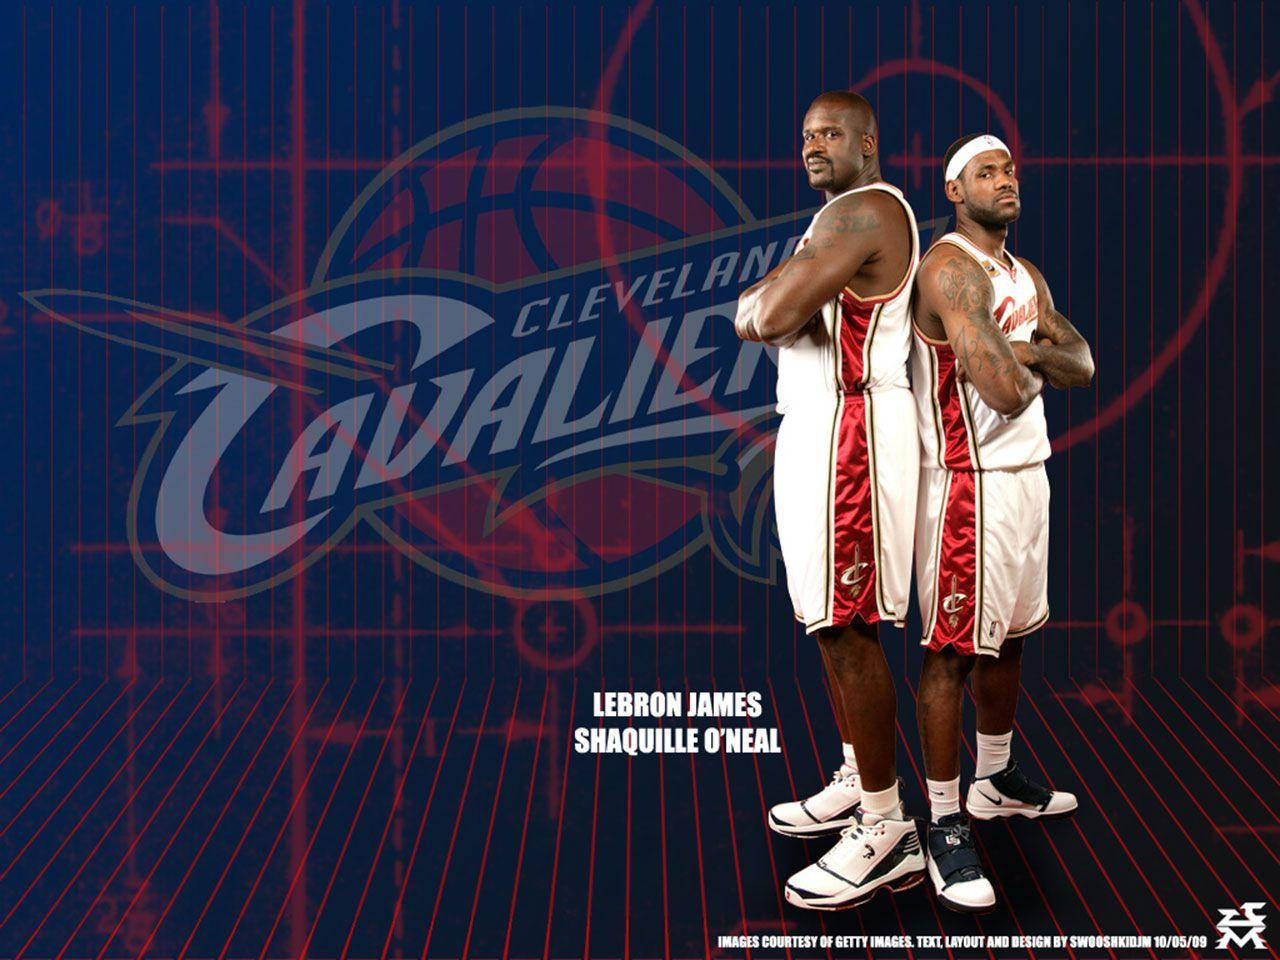 Shaquille O'neal Cavalier Poster